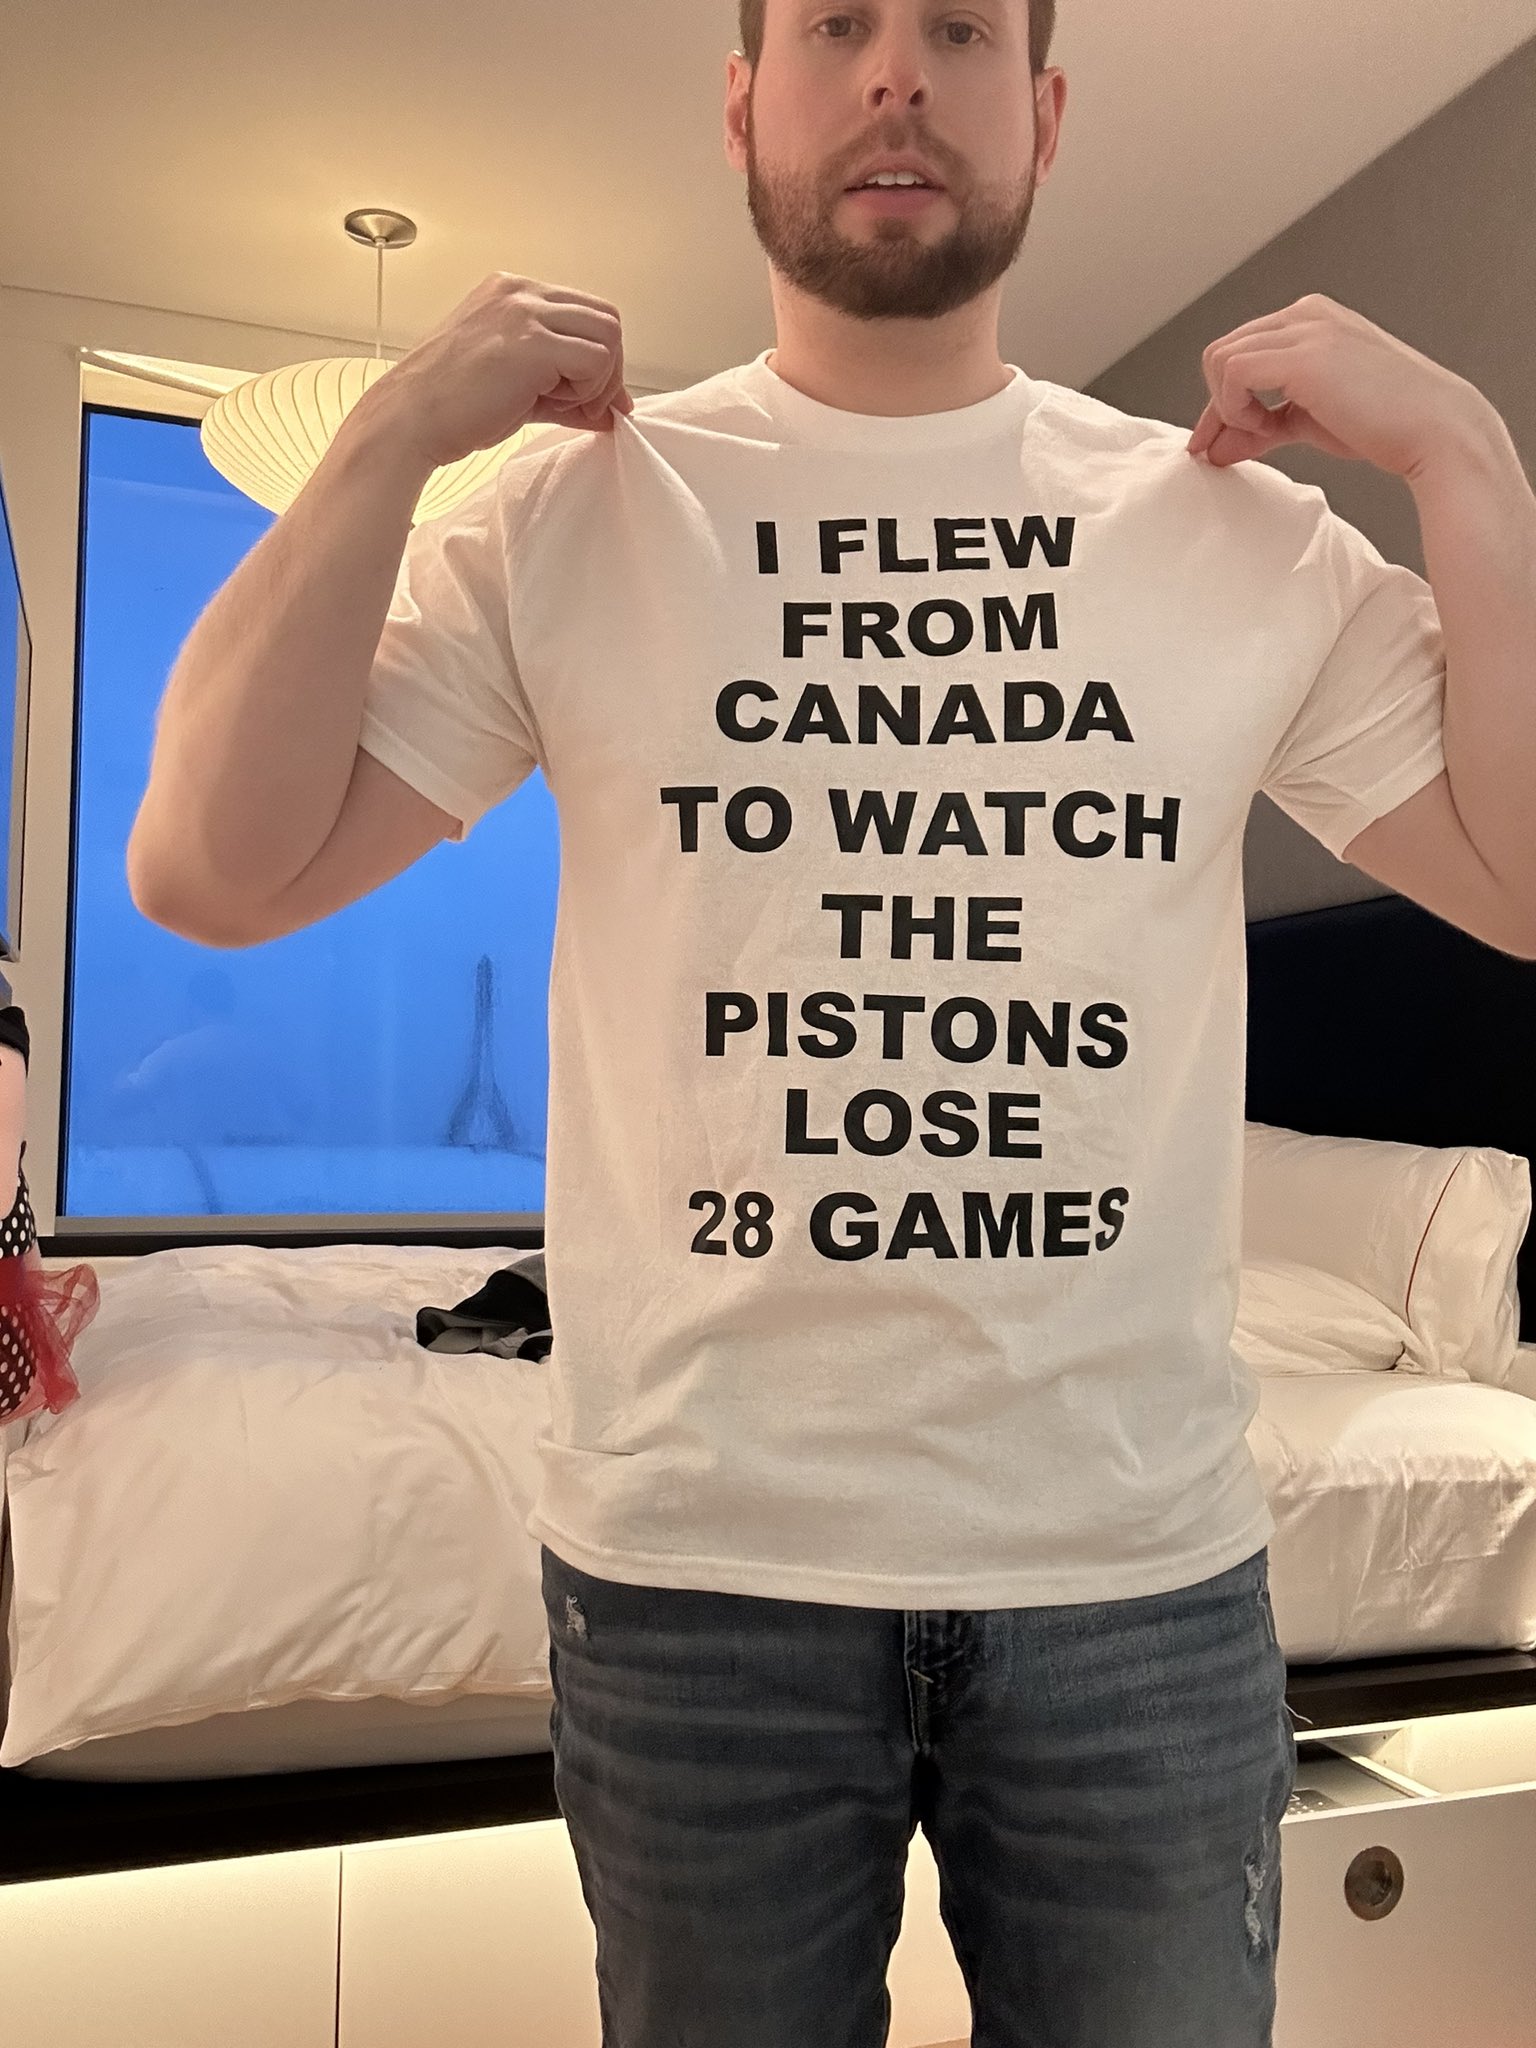 YouTuber named 'TroyDan' trolled the Pistons with his shirt